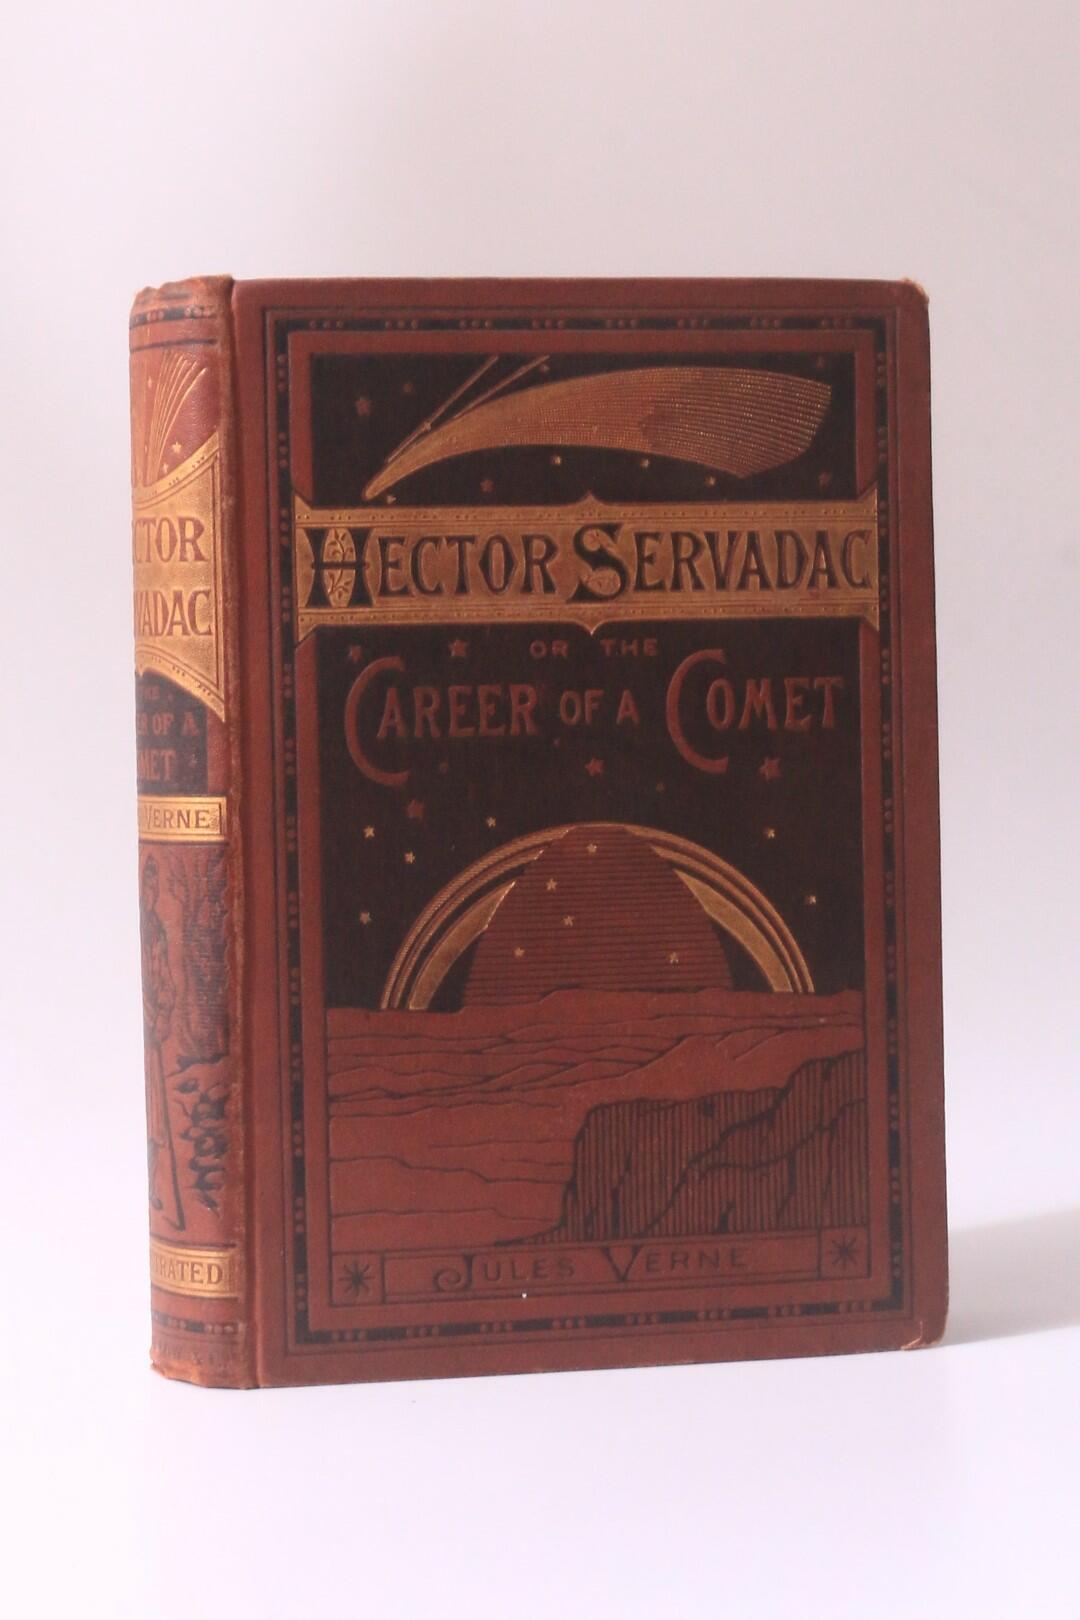 Jules Verne - Hector Servadac or the Career of a Comet - Sampson, Low, Marston, Searle & Rivington, 1878, First Edition.